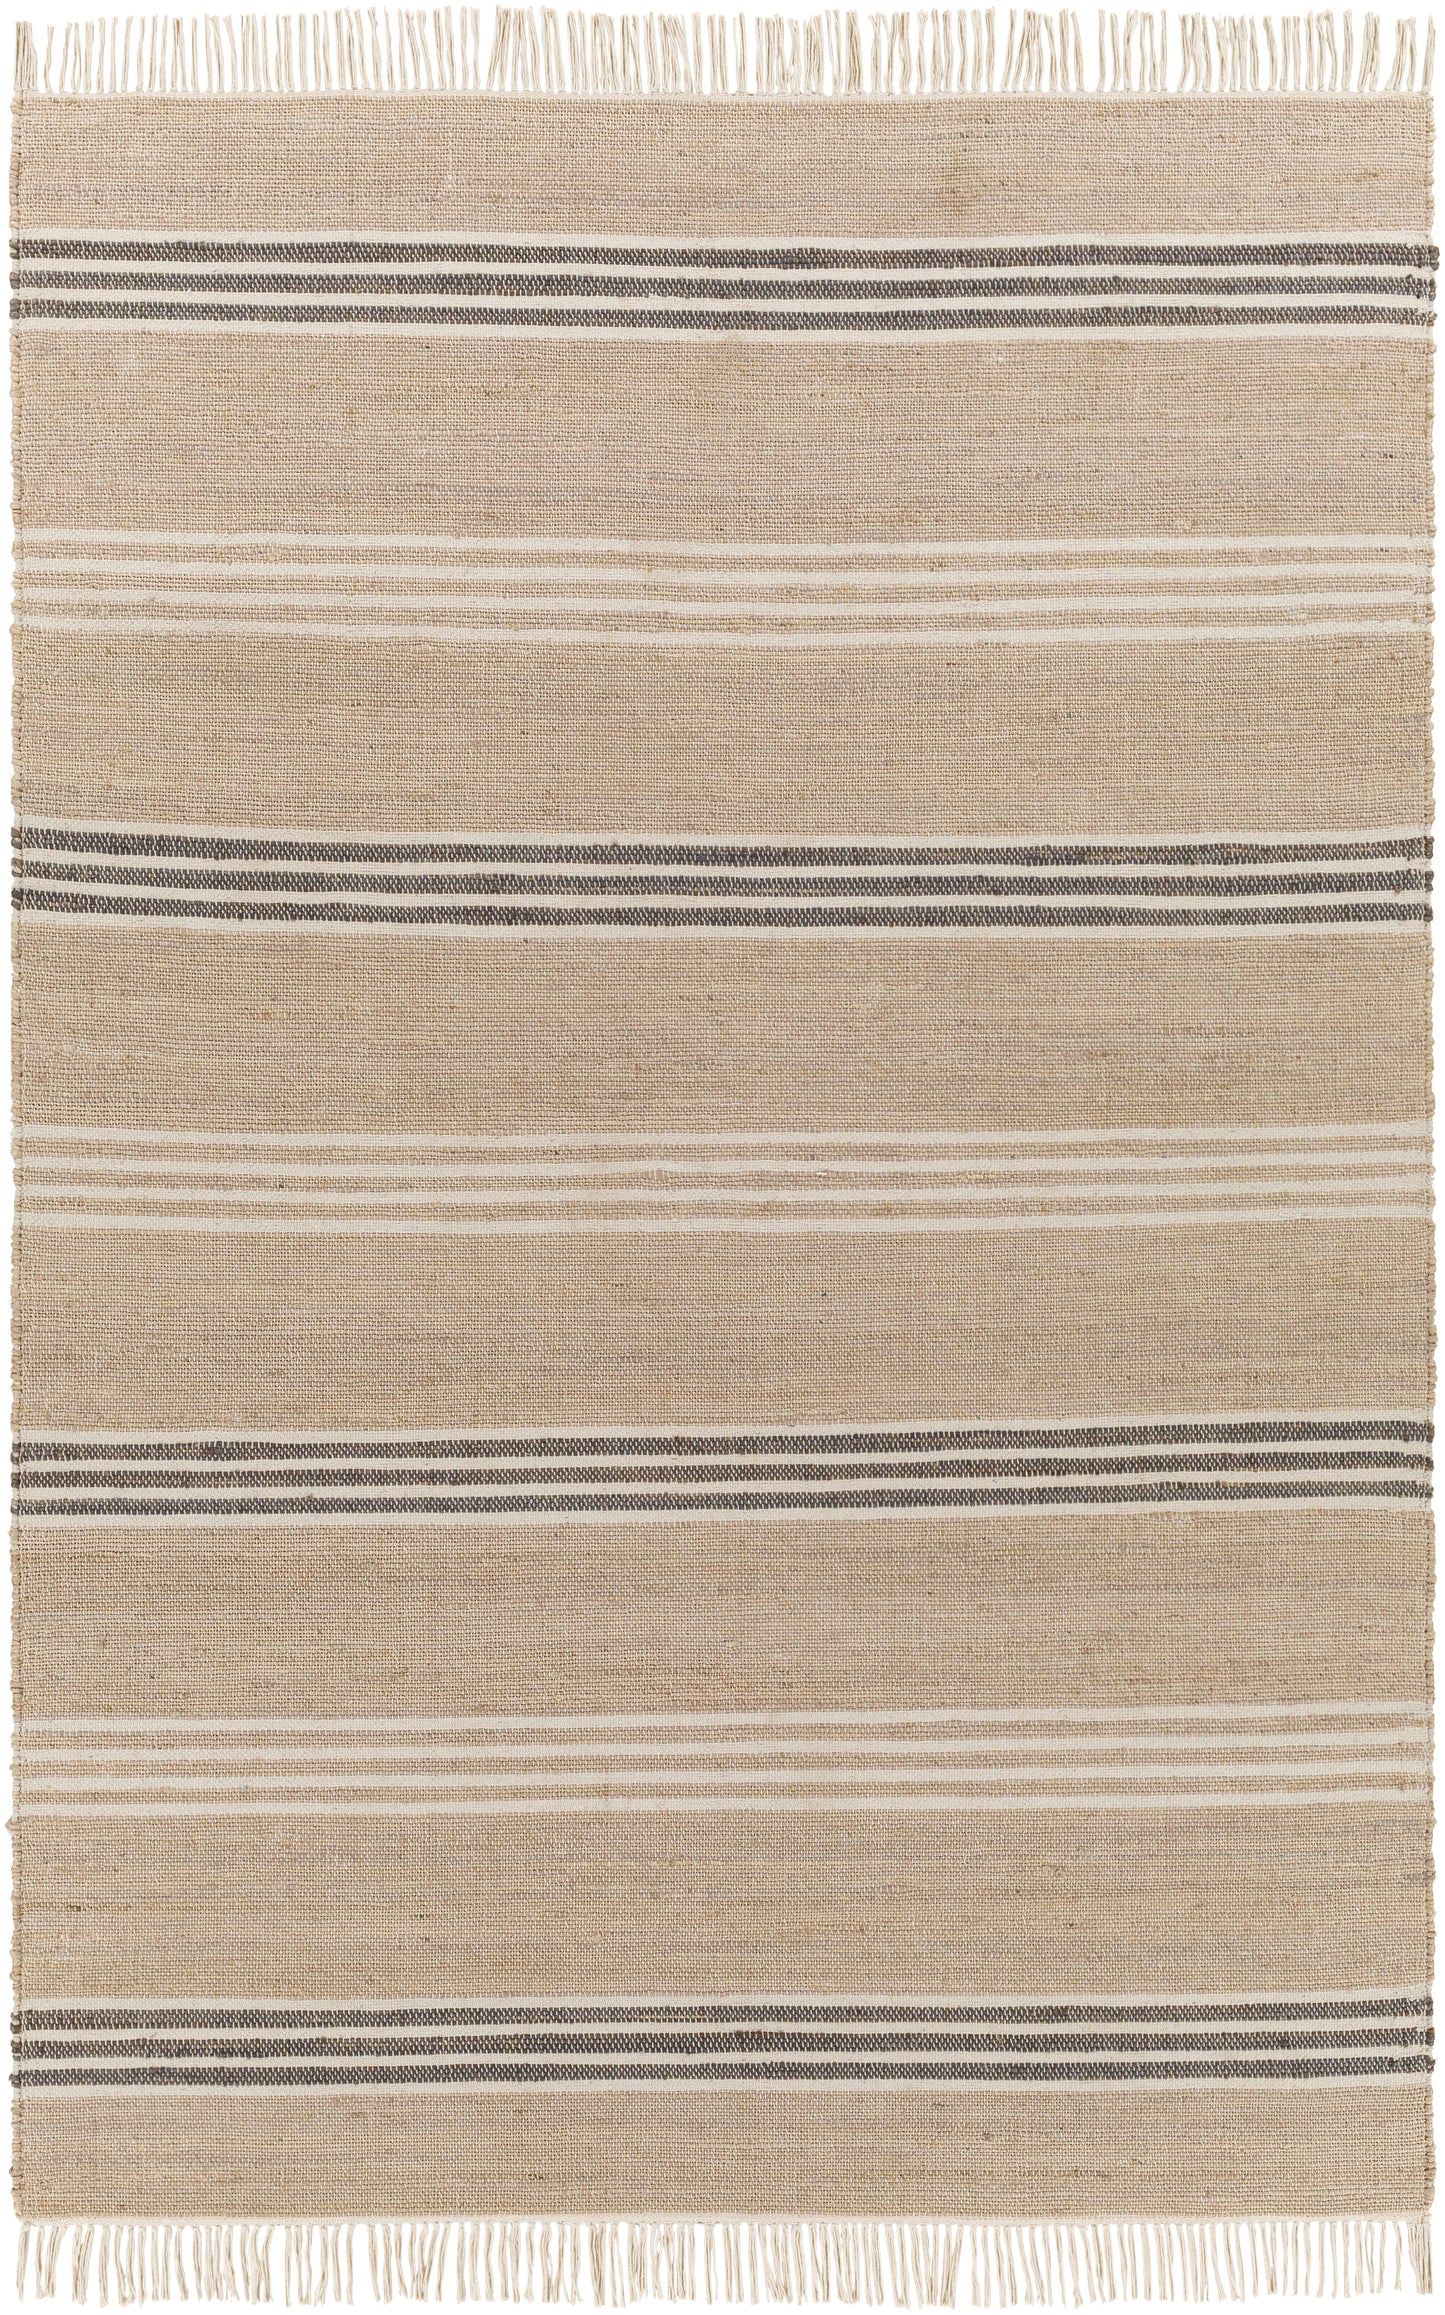 Trabzon 30337 Hand Woven Jute Indoor Area Rug by Surya Rugs